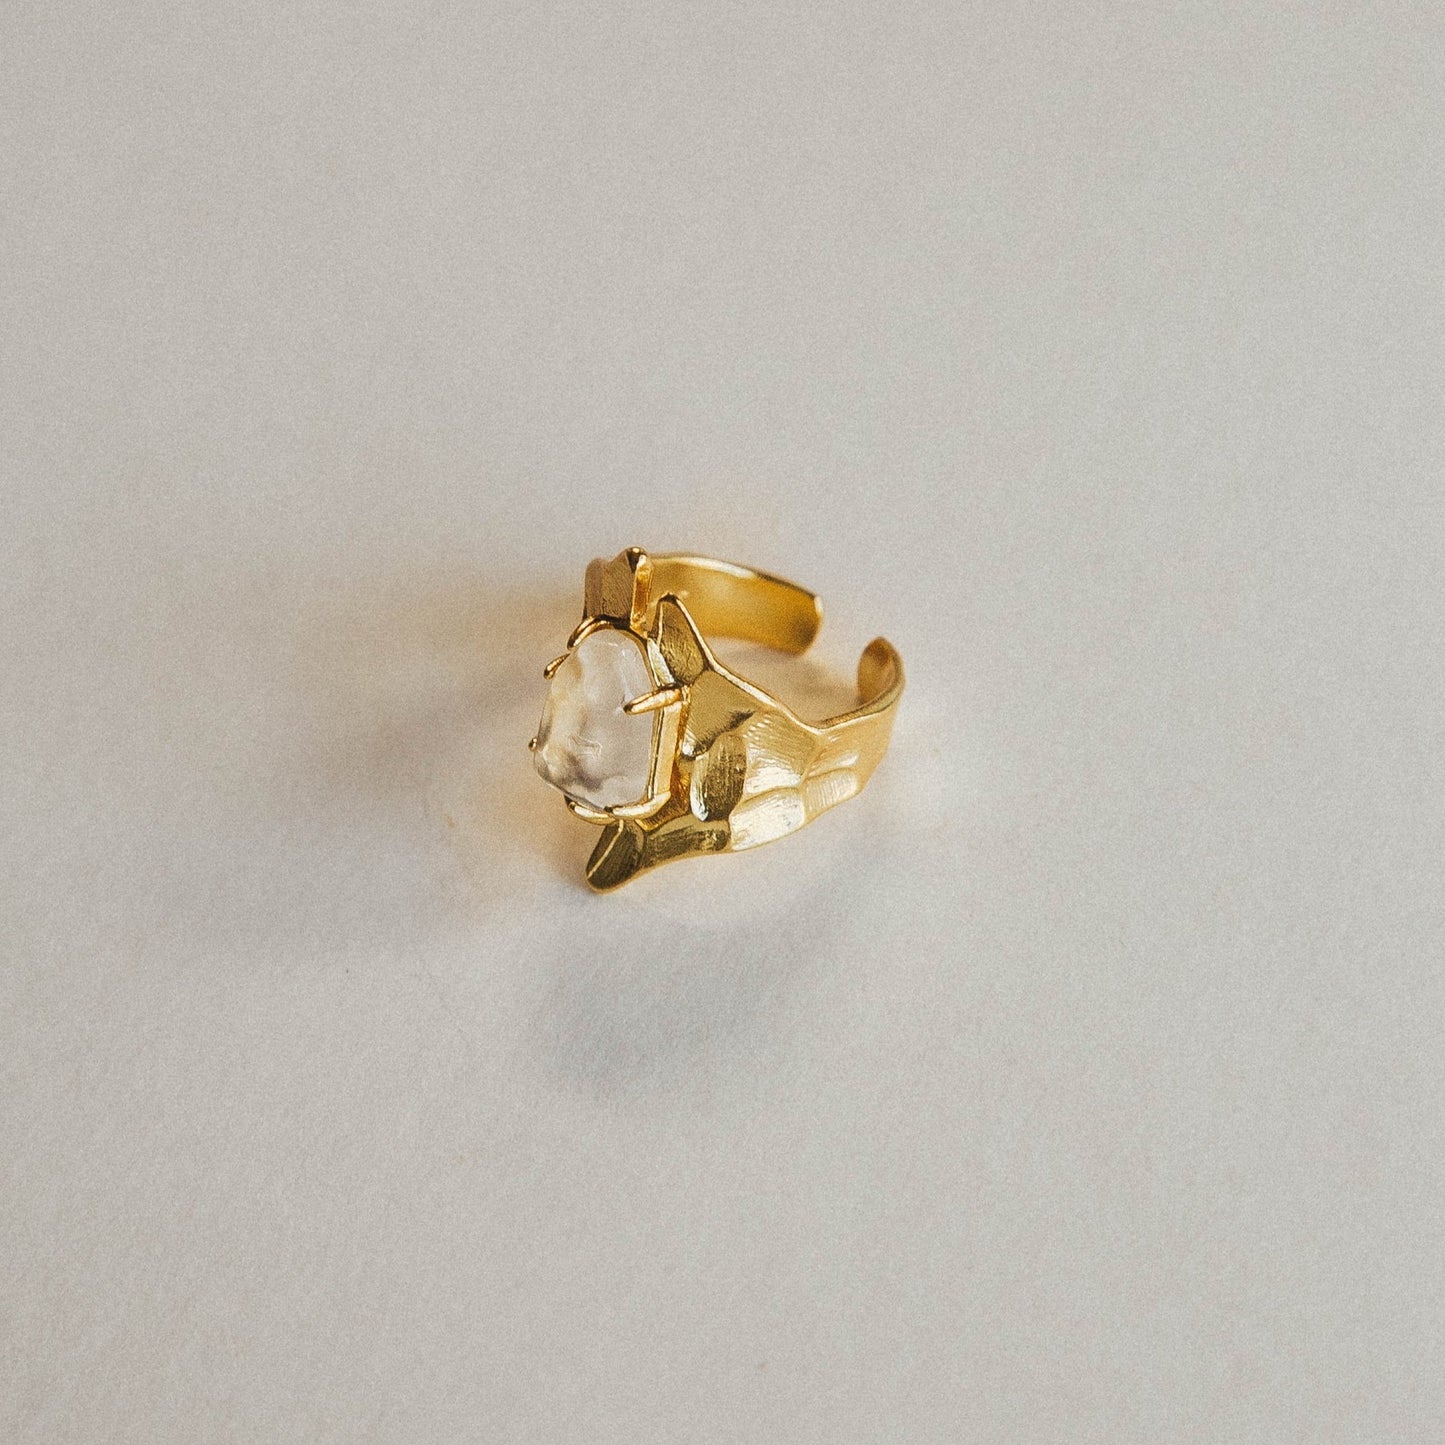 Predator Ring in 18kt gold vermeil with a white crystal stone